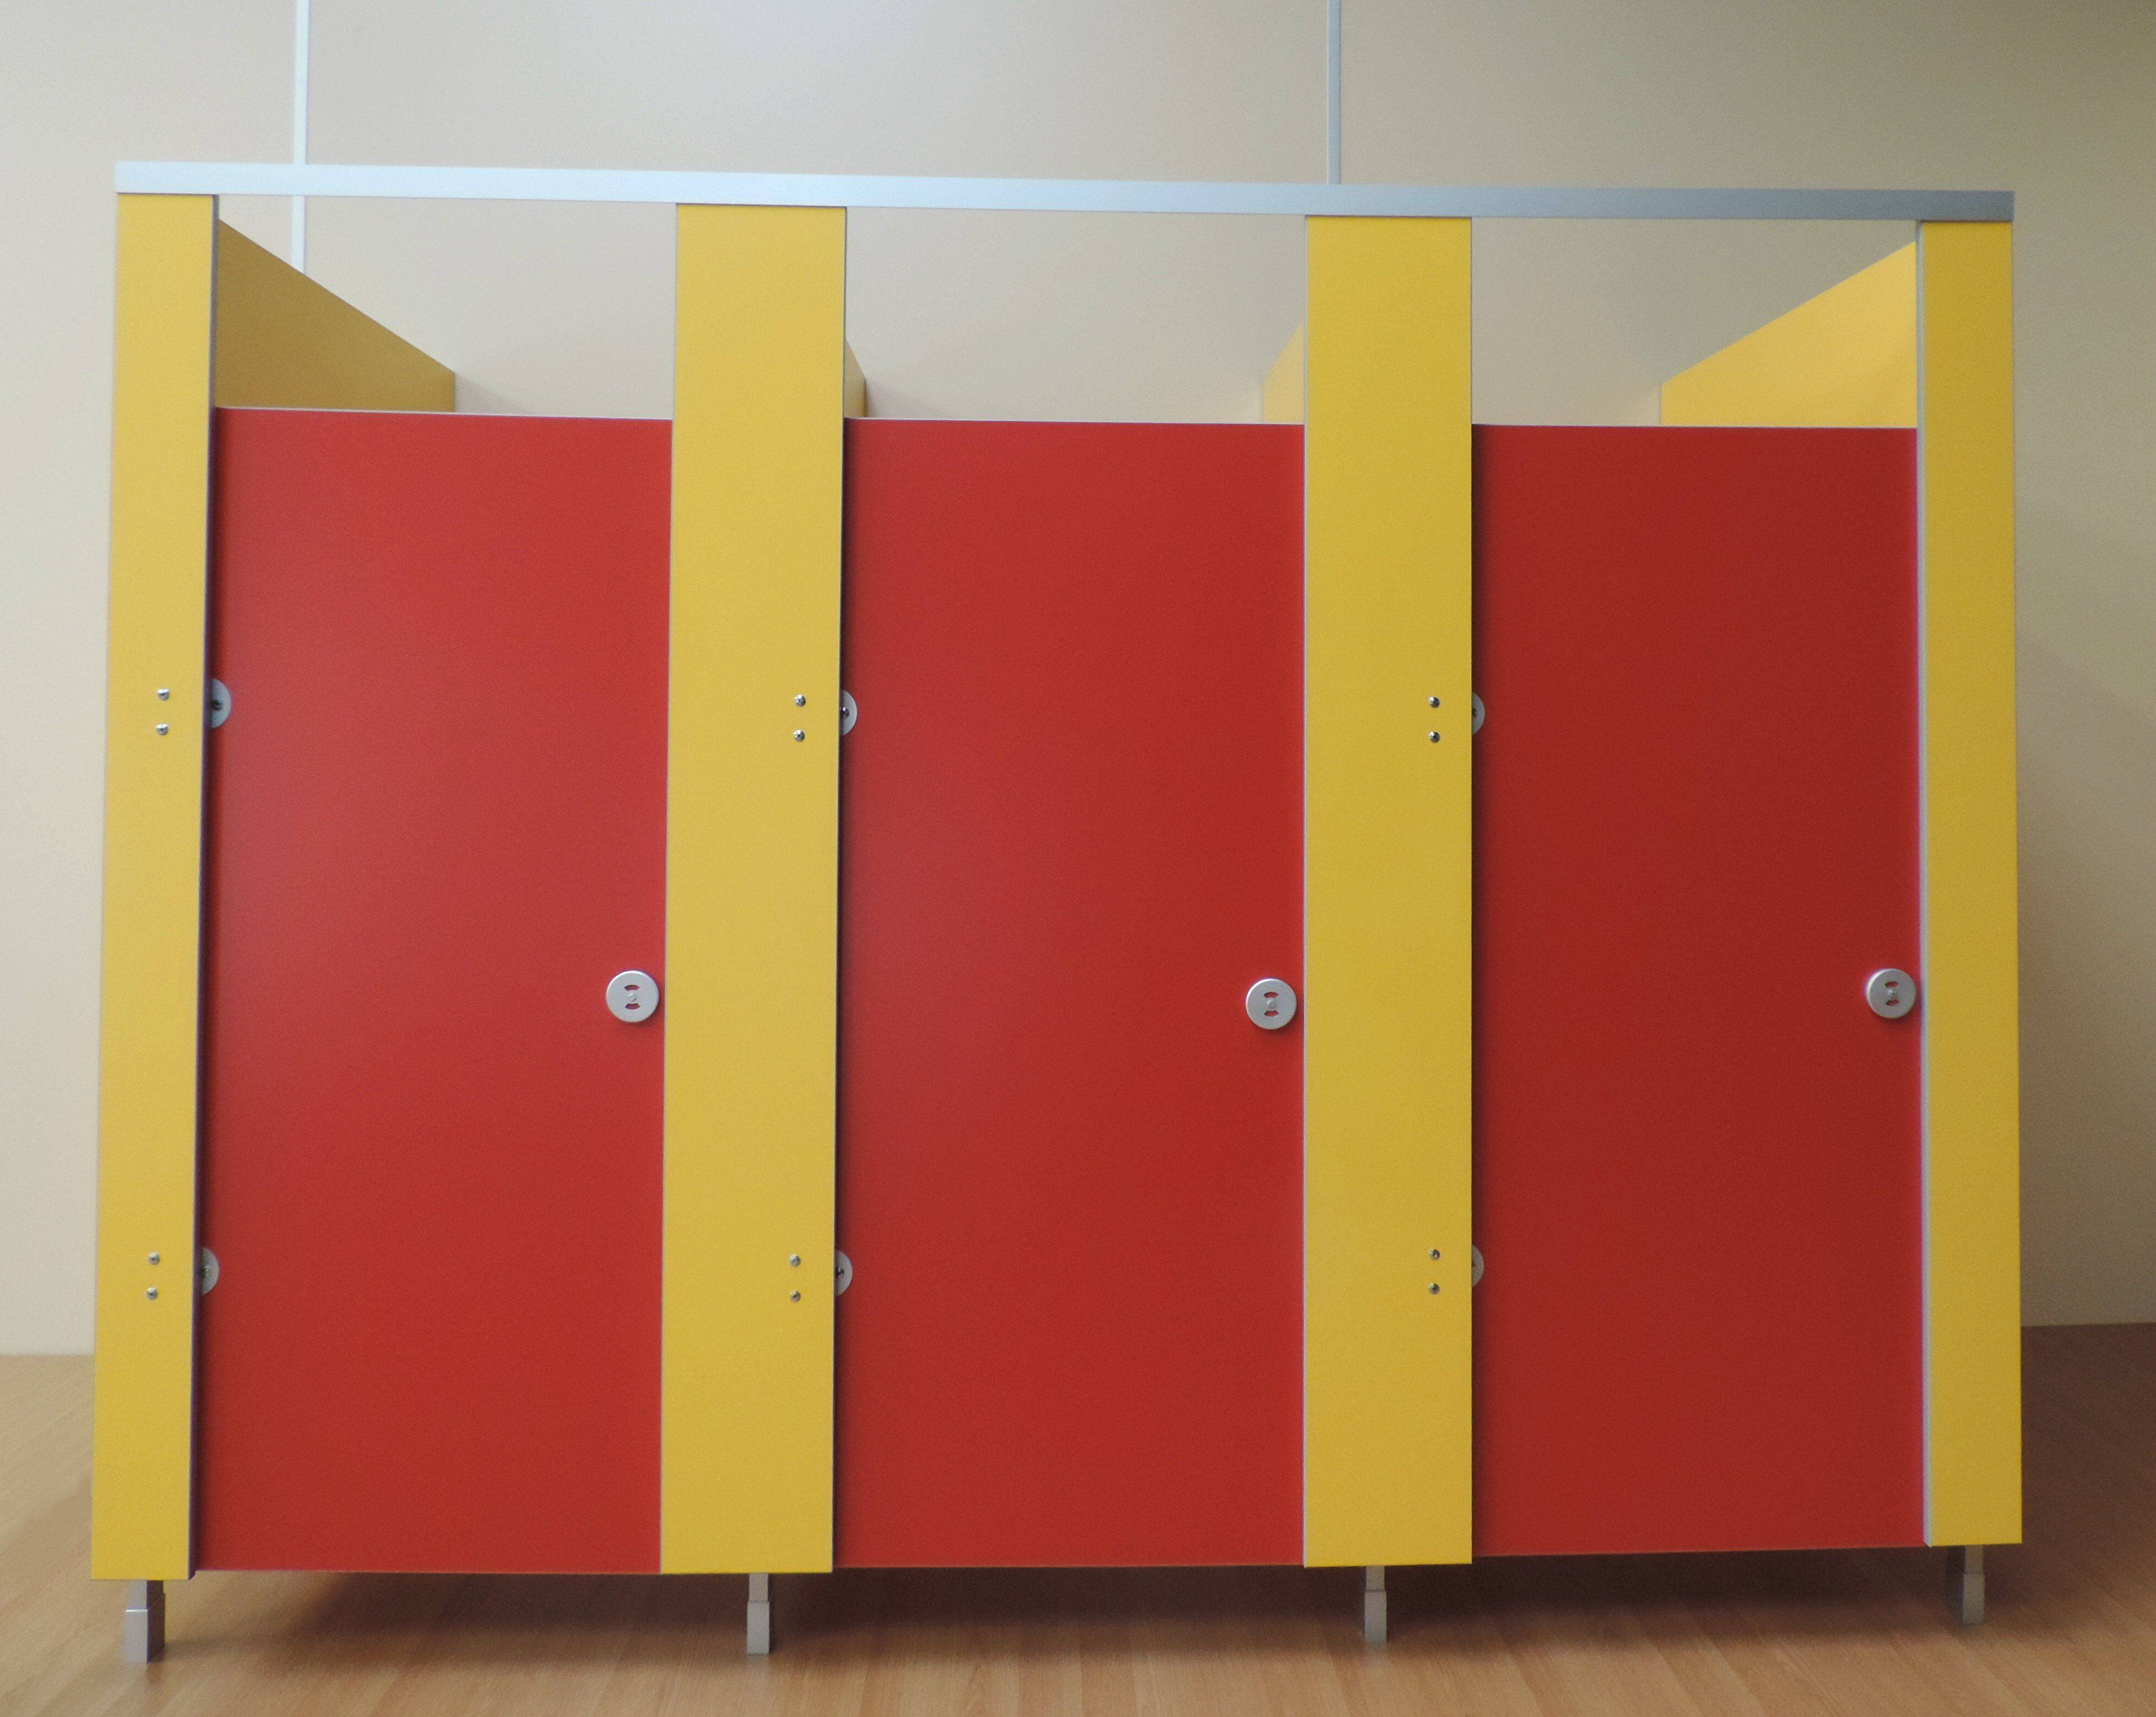 Suppliers Of Toilet Cubicles For The Educational Industry UK